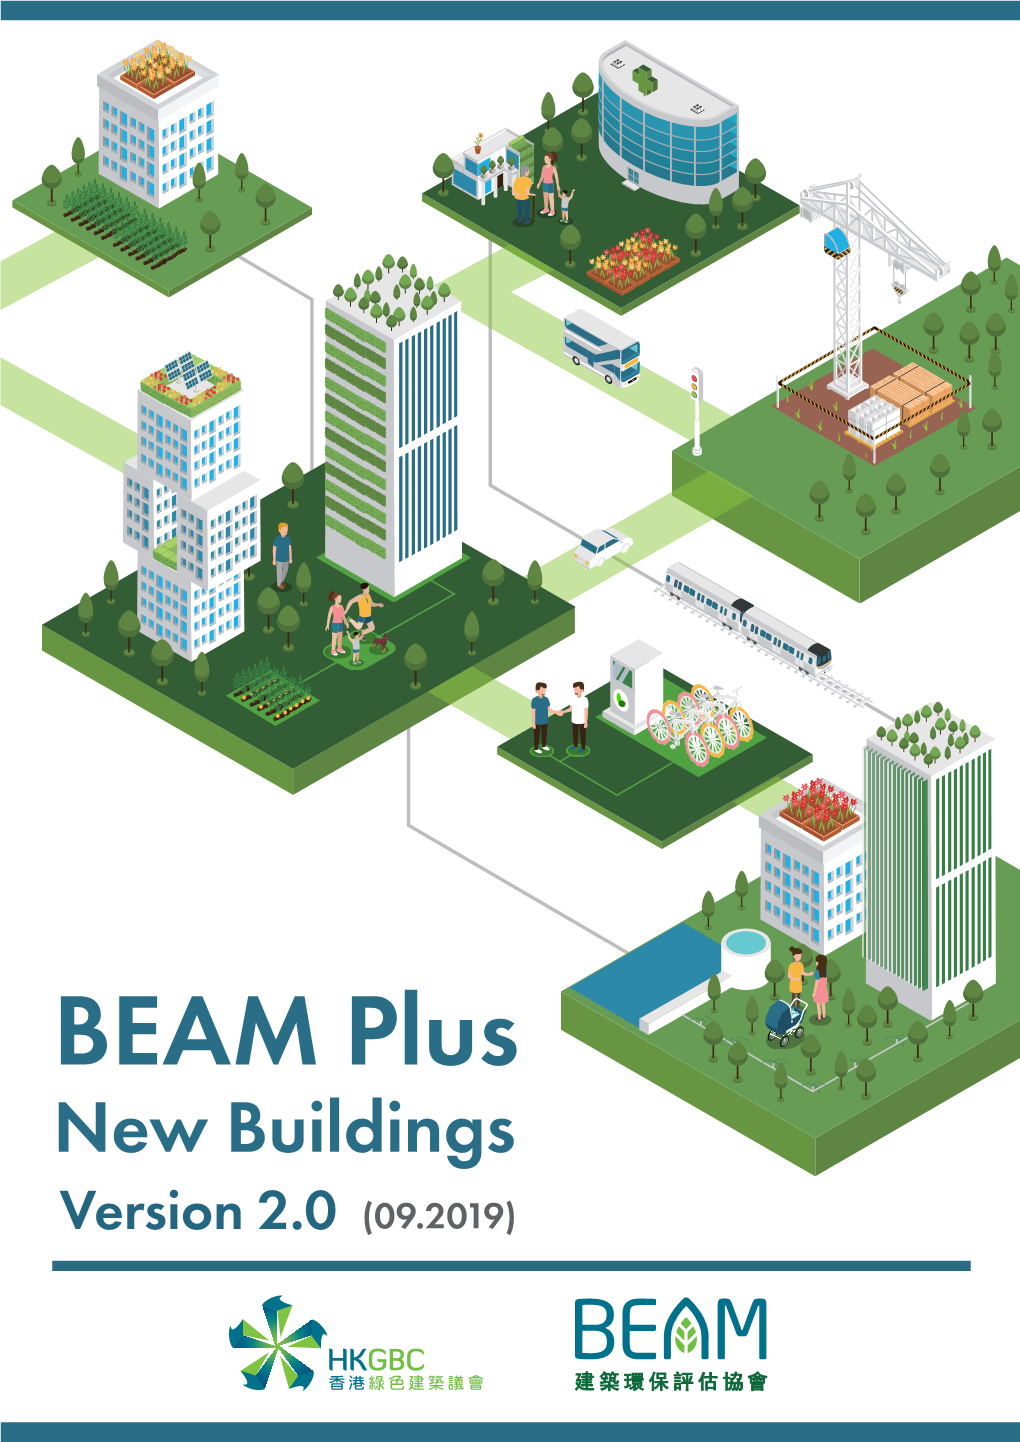 BEAM Plus New Buildings V2.0 Is Engaged As the Project BEAM Pro of the Consultant Team